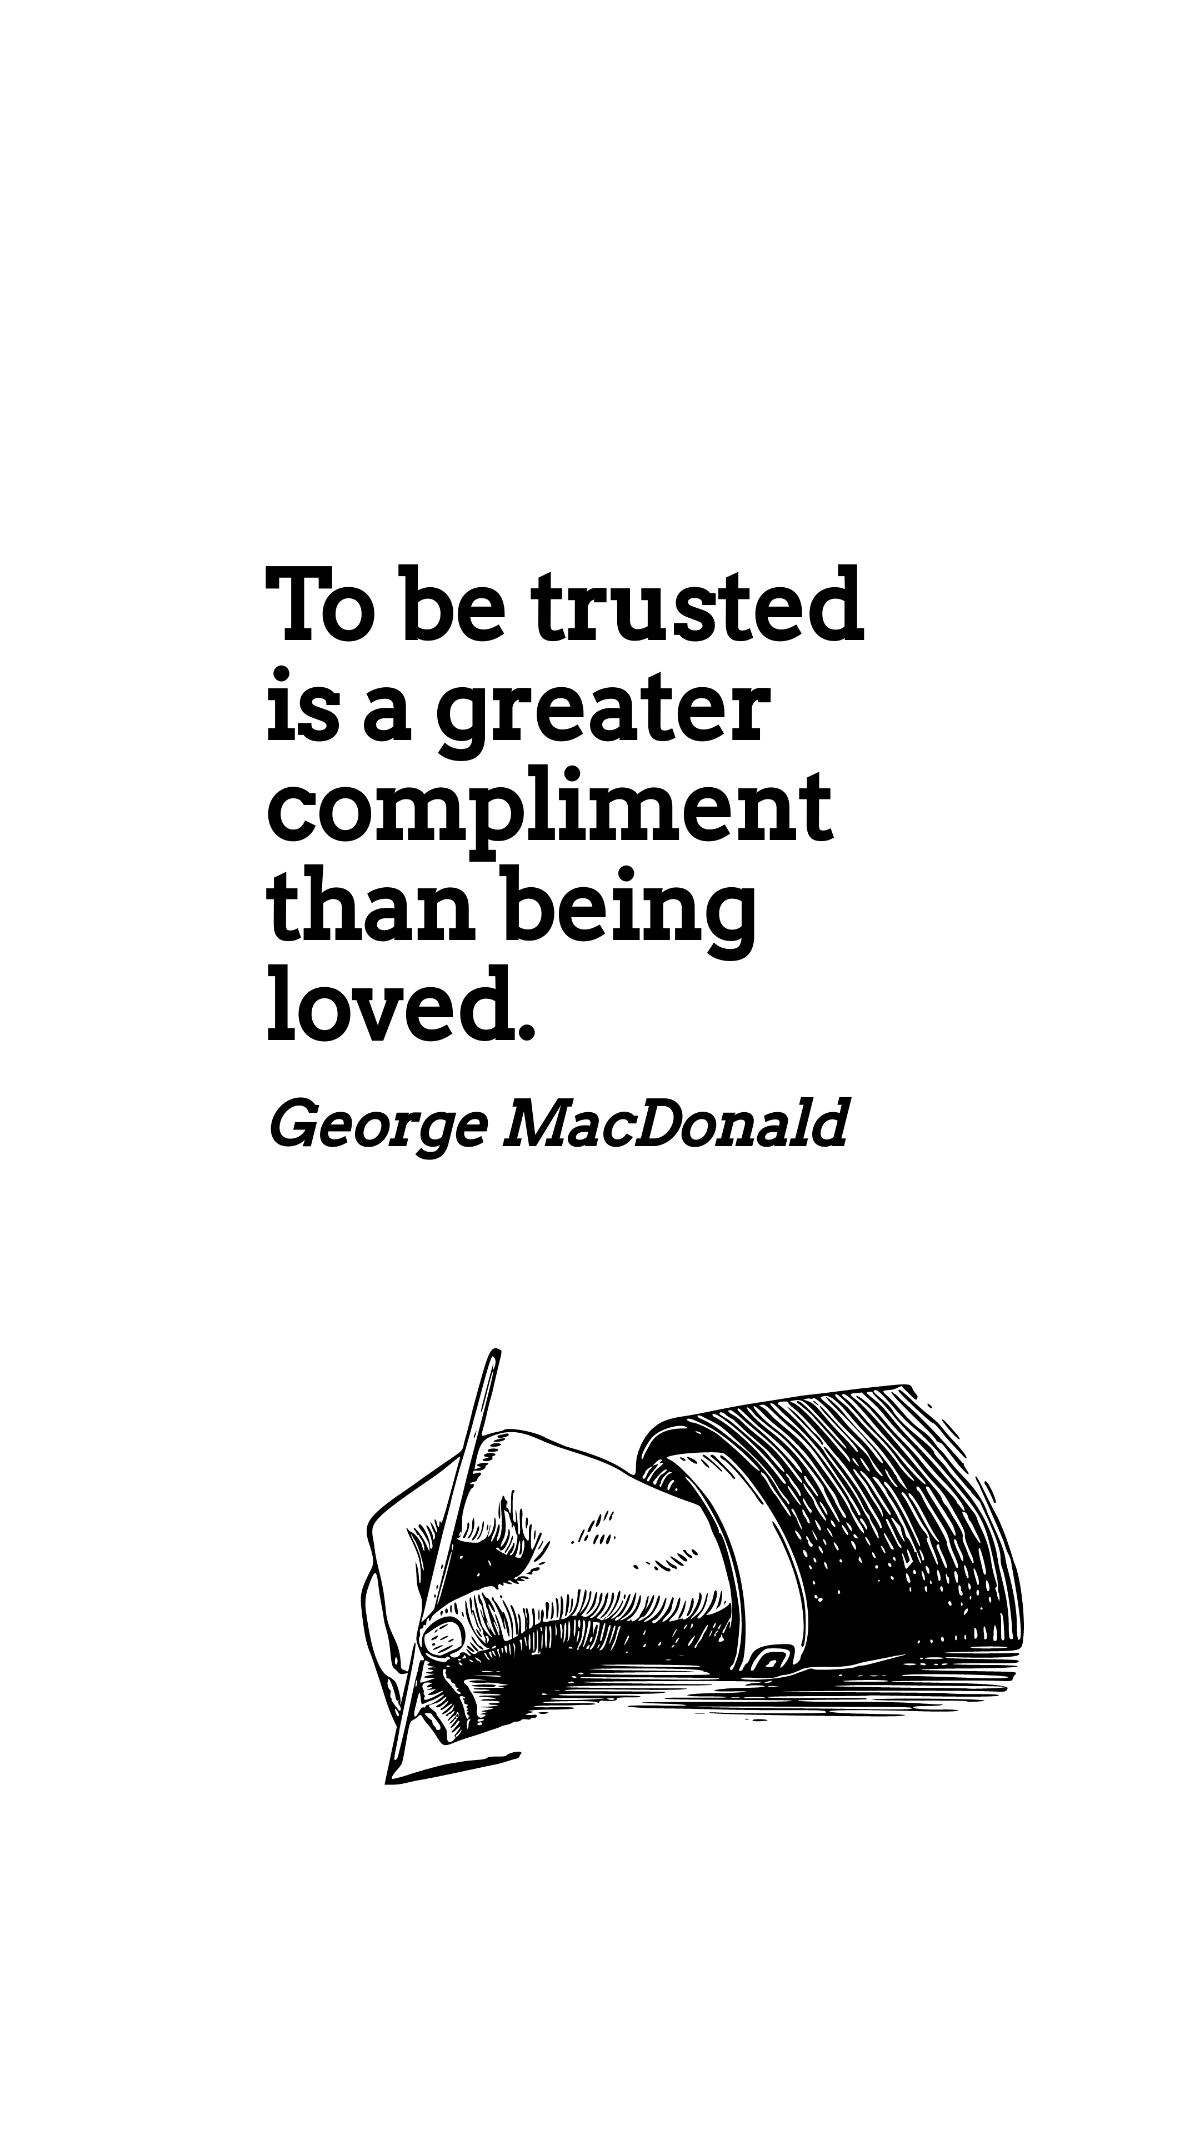 Free George MacDonald - To be trusted is a greater compliment than being loved. Template